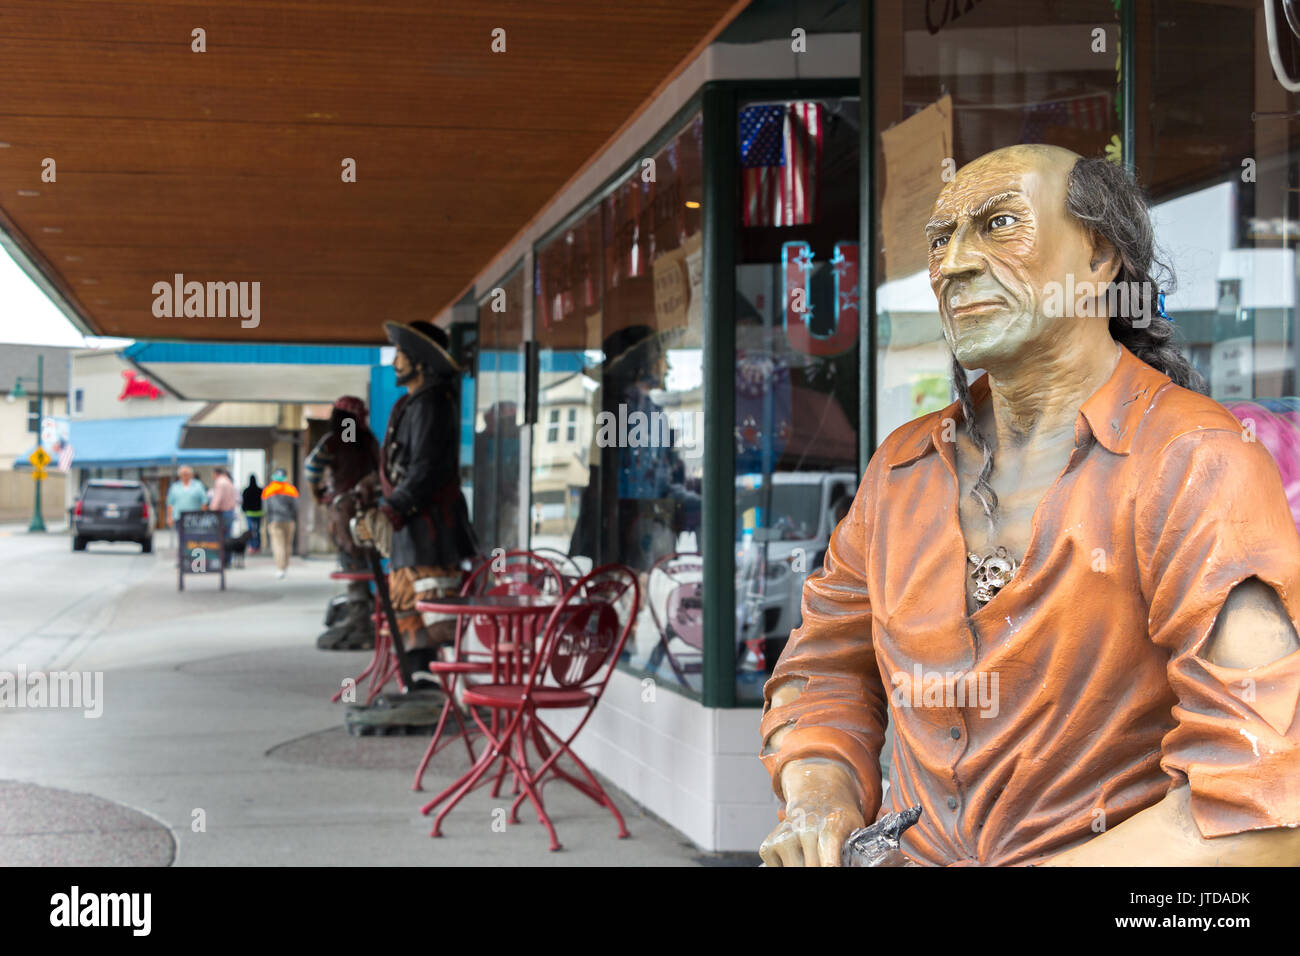 Wrangell, Alaska, USA - July 24, 2017: Pirate life size mannequin outside the Stikine Drug souvenirs store at the Front street. Stock Photo